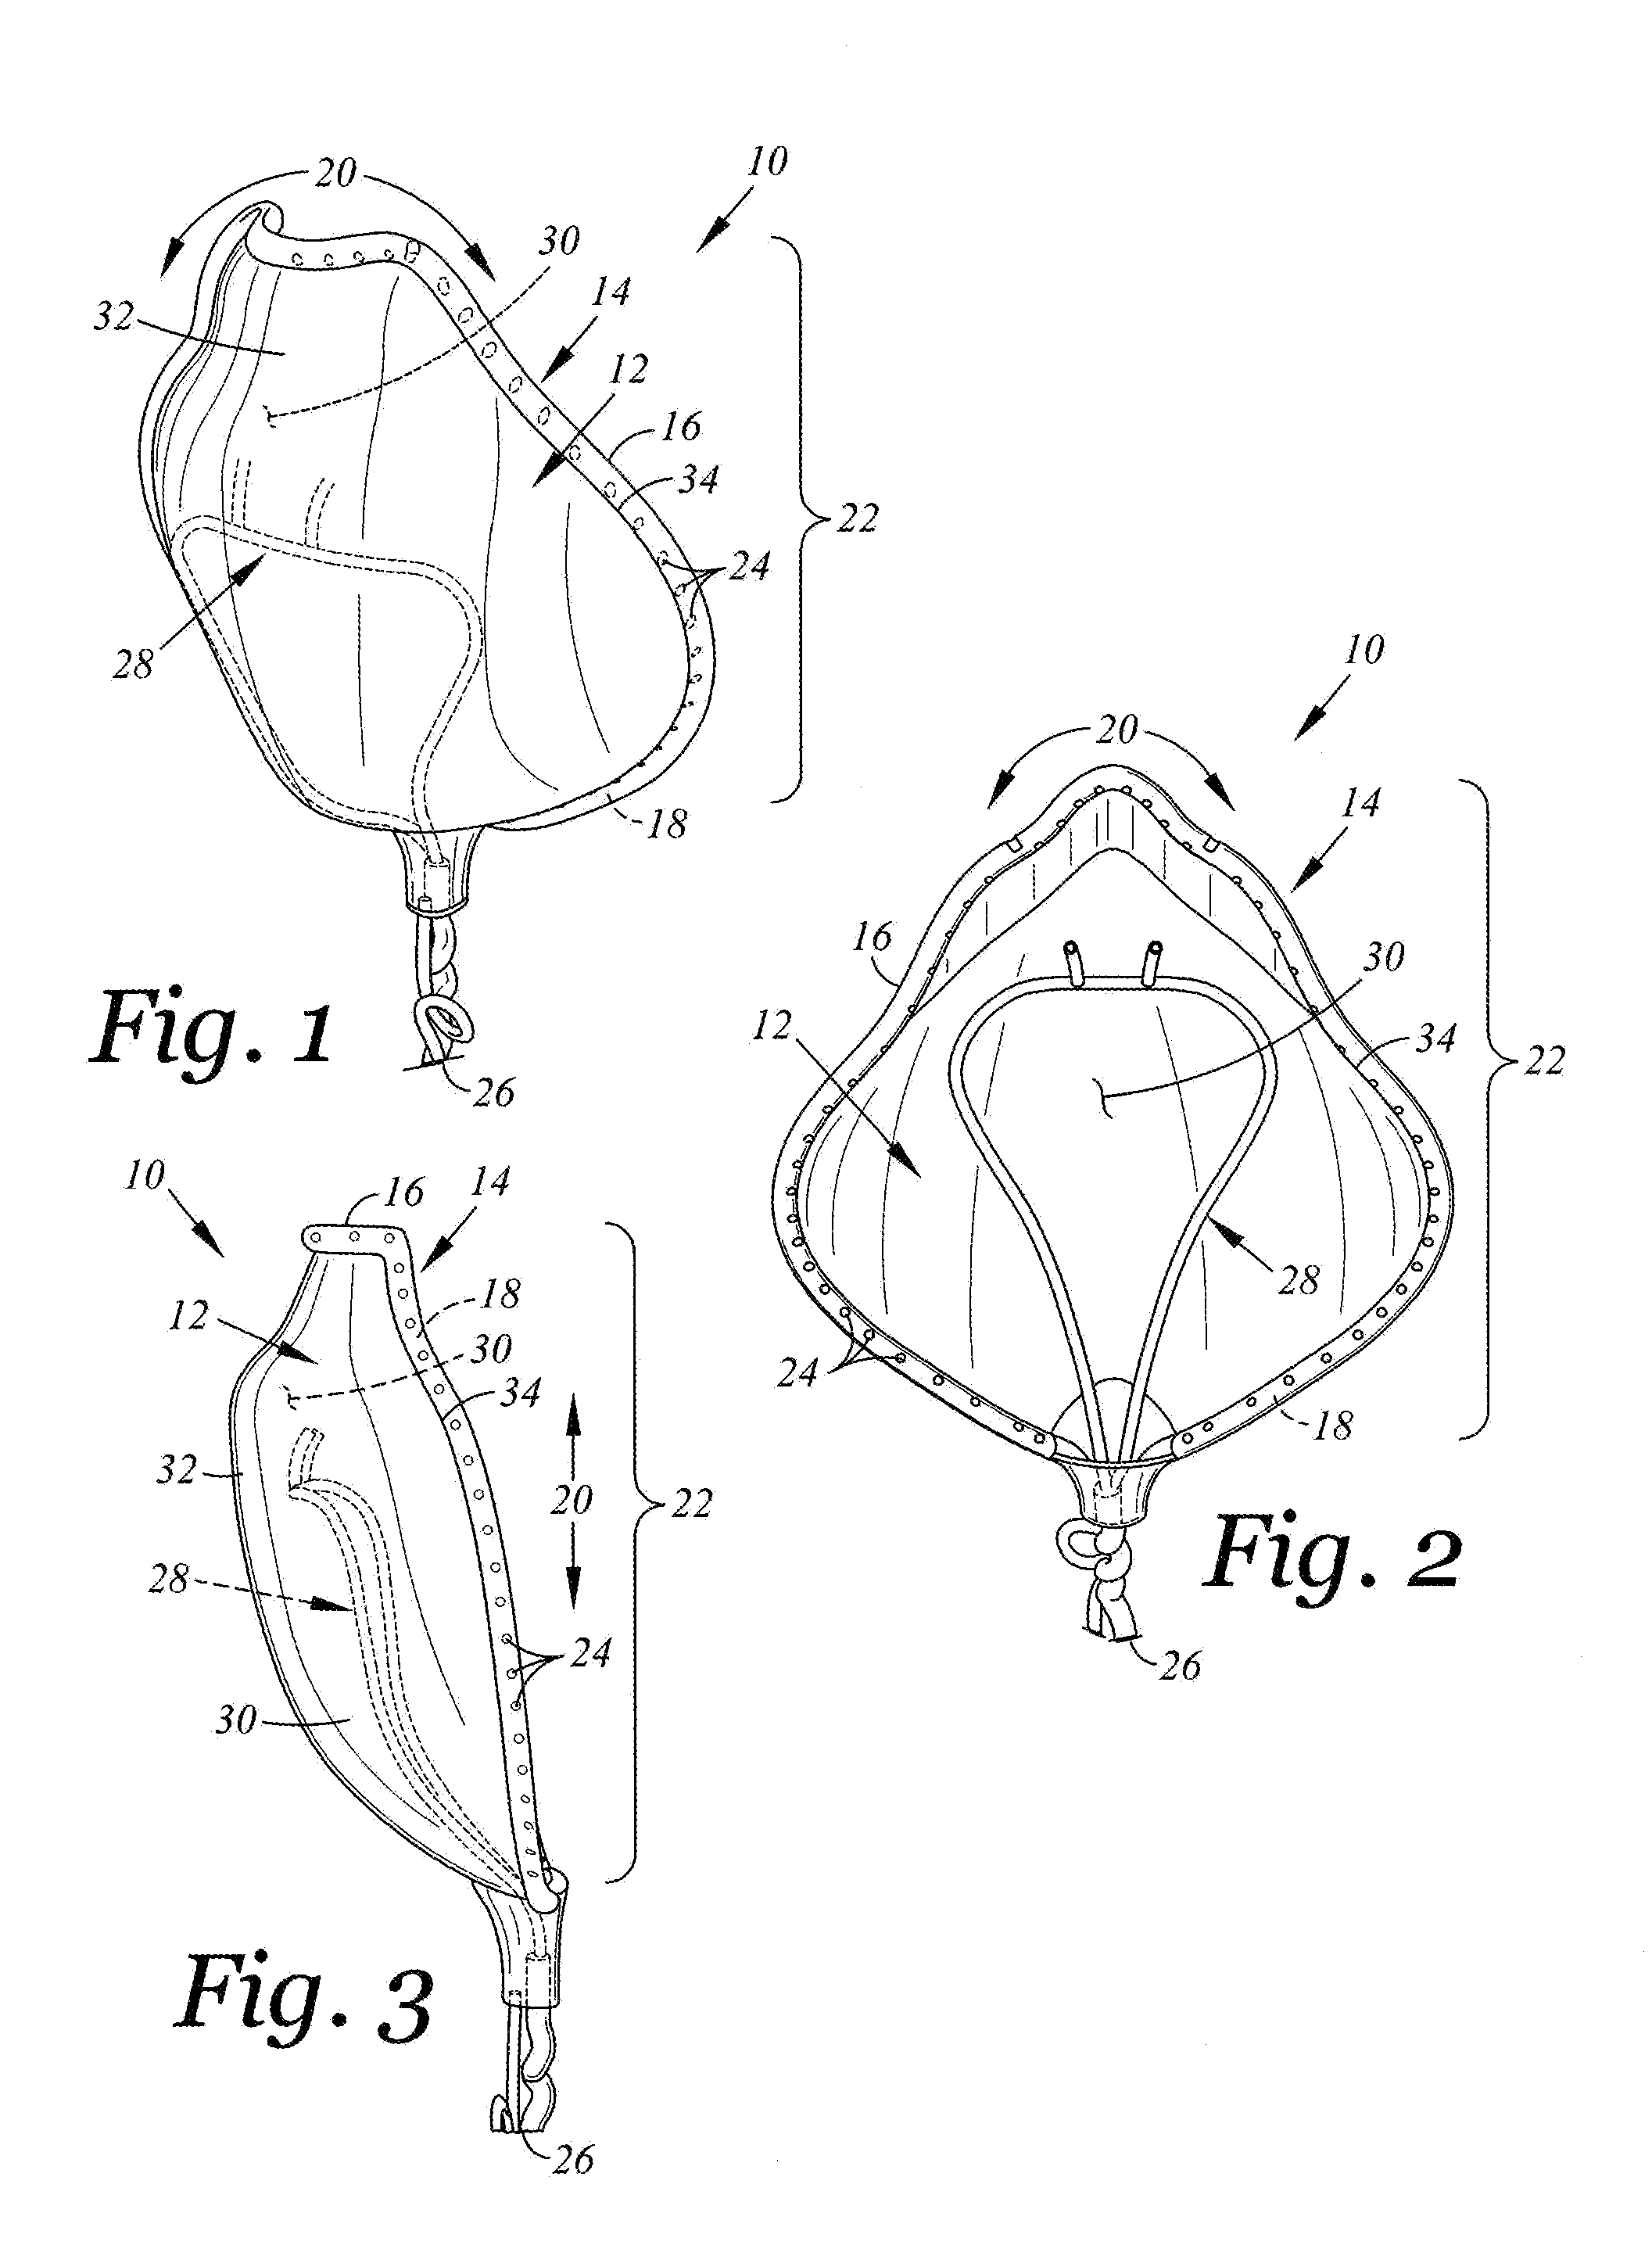 Devices and methods for surgical fire prevention